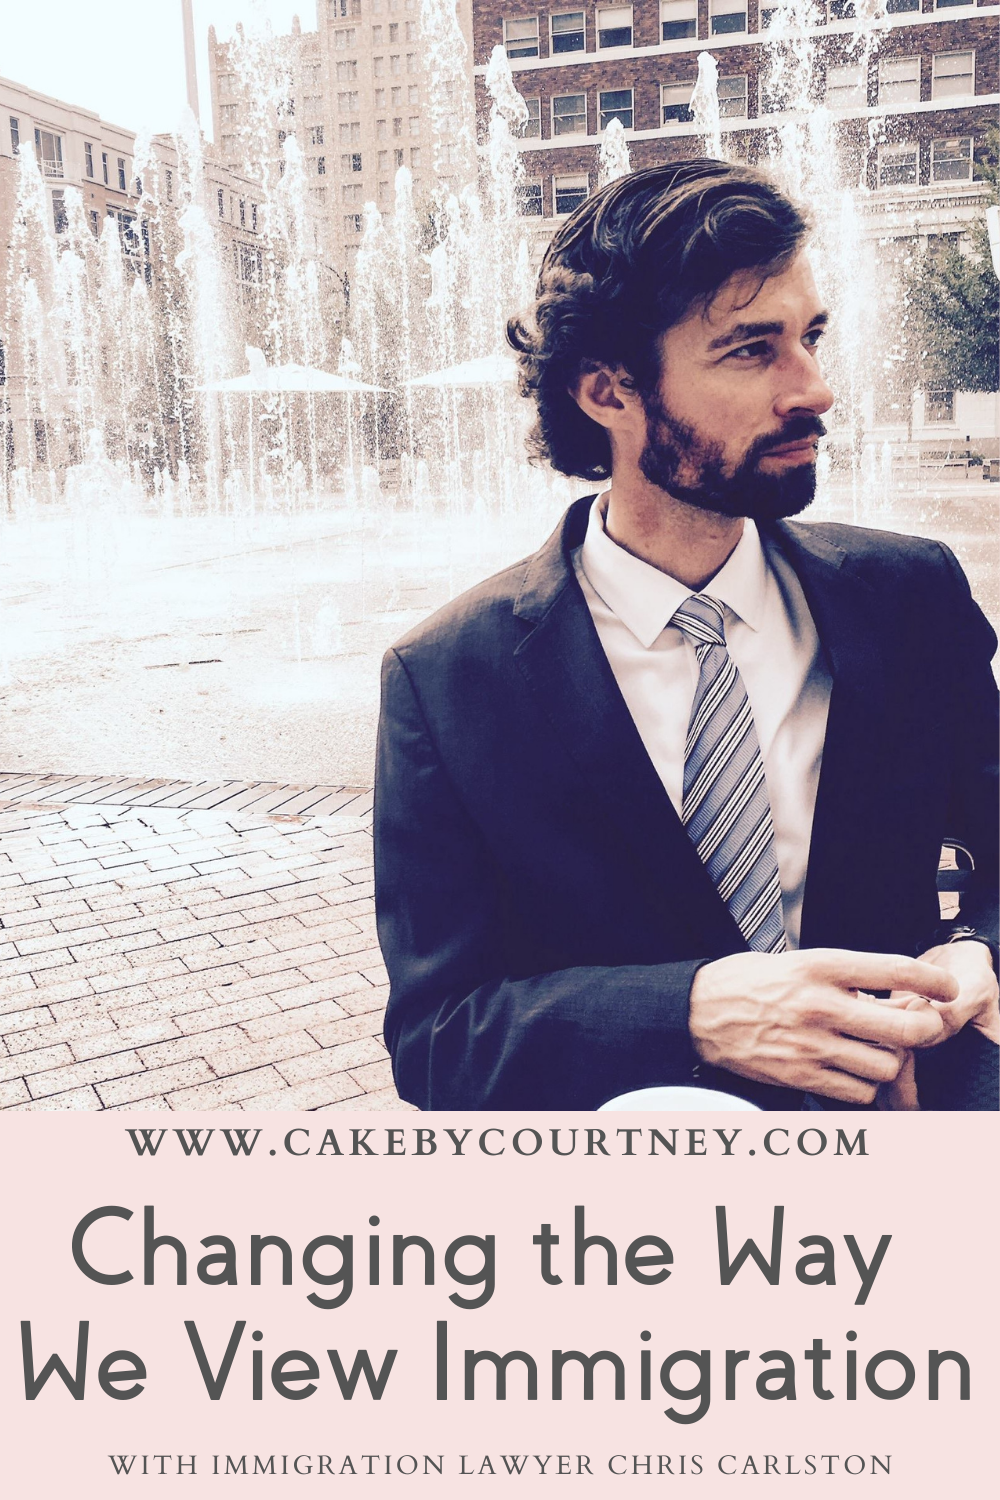 how immigration lawyer changes hearts on both sides of the country. www.cakebycourtney.com